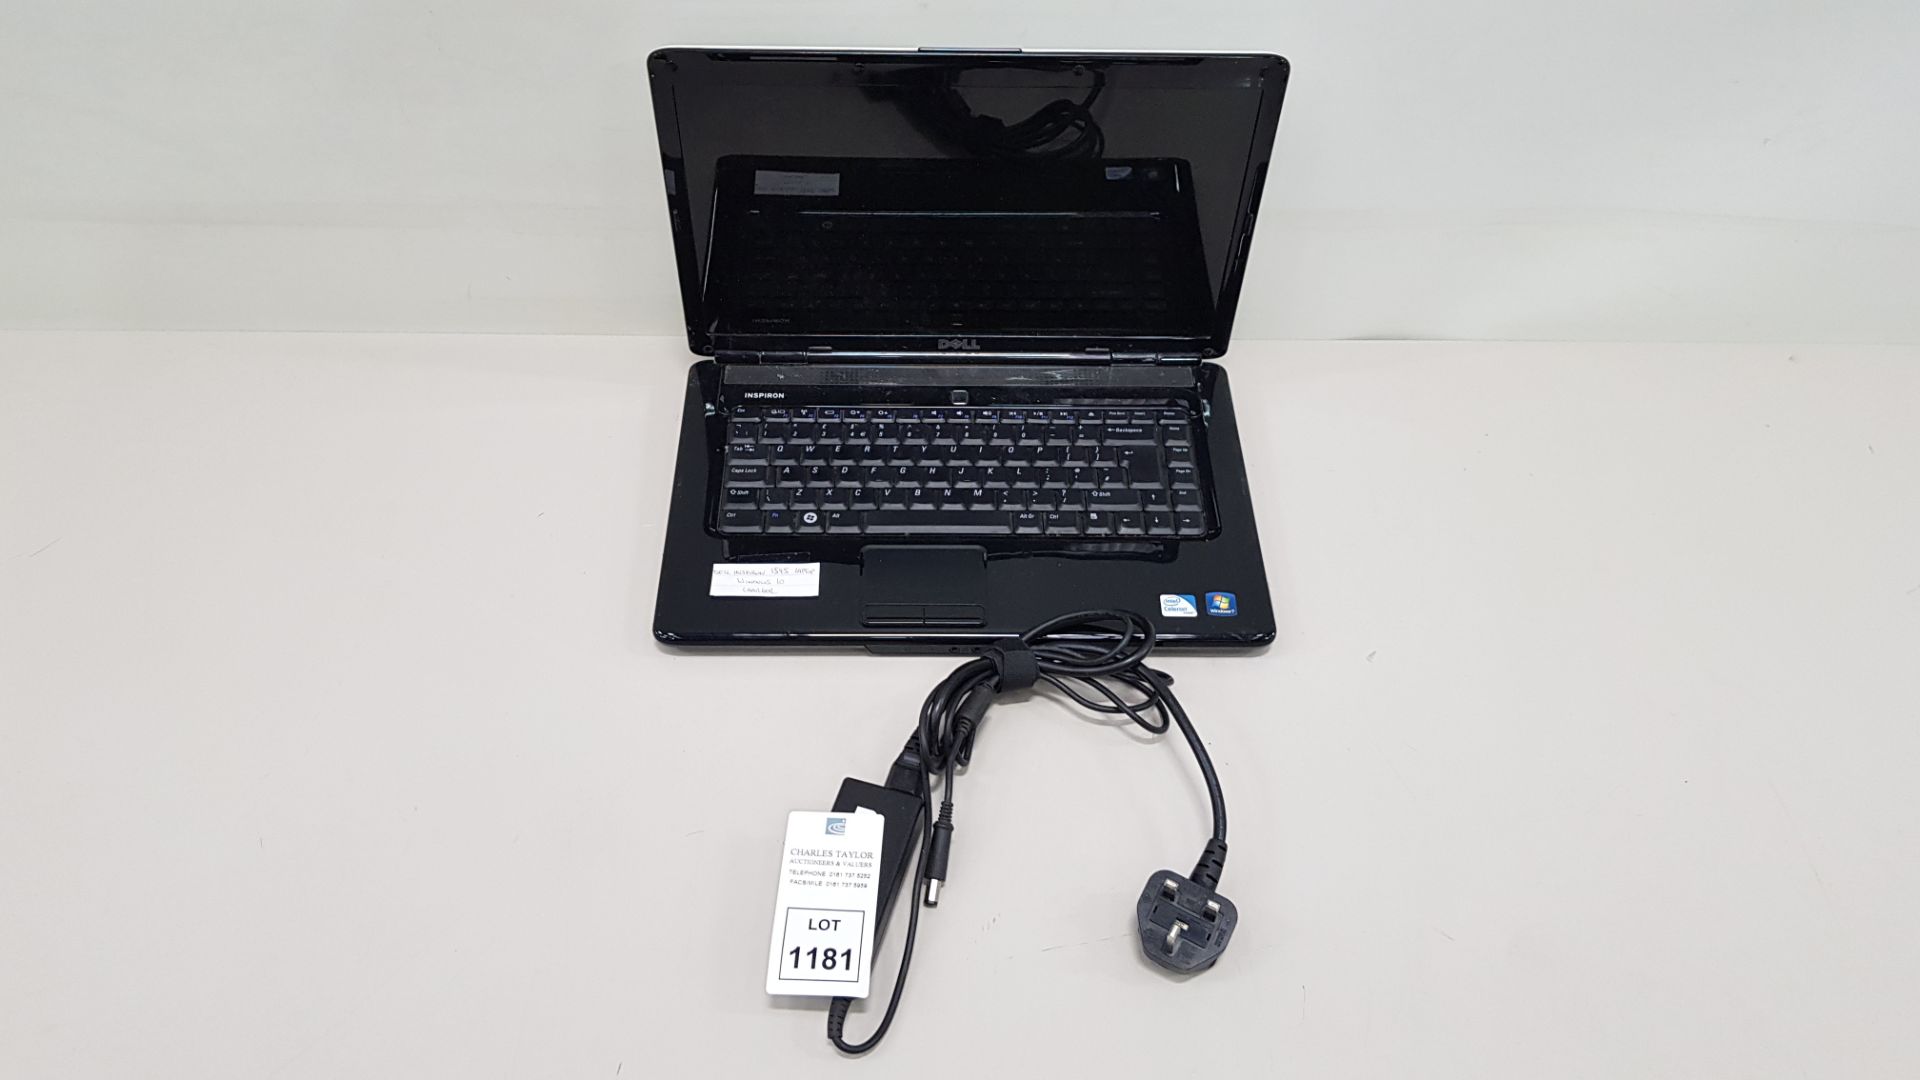 DELL INSPIRON 1545 LAPTOP WINDOWS 10 - WITH CHARGER